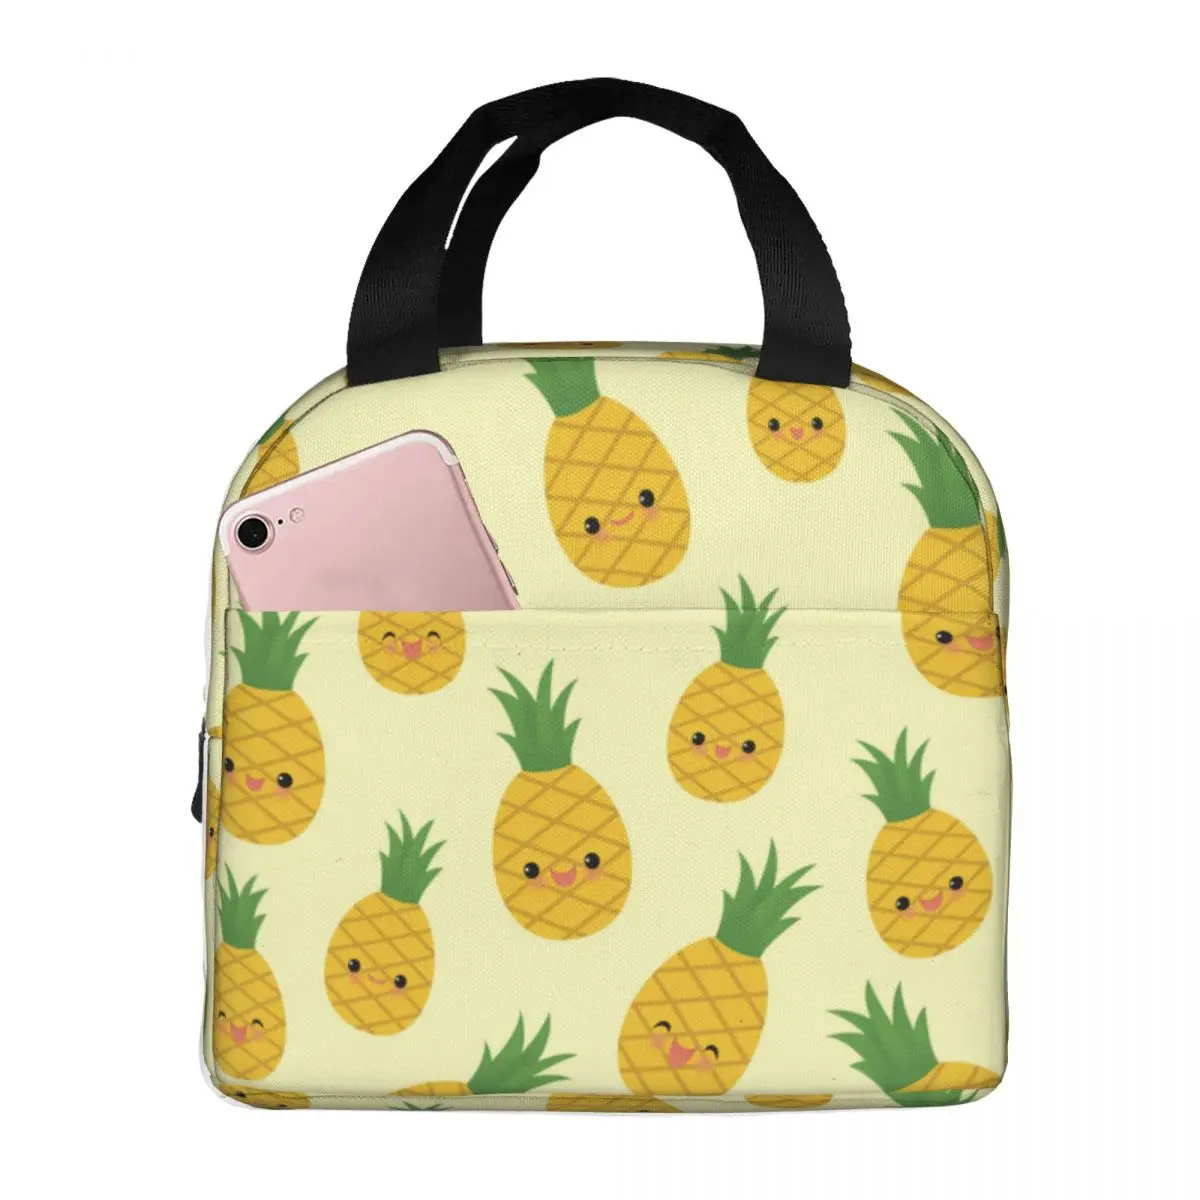 Lunch Bag for Men Women Smiling Pineapples Thermal Cooler Portable Picnic Oxford Tote Handbags